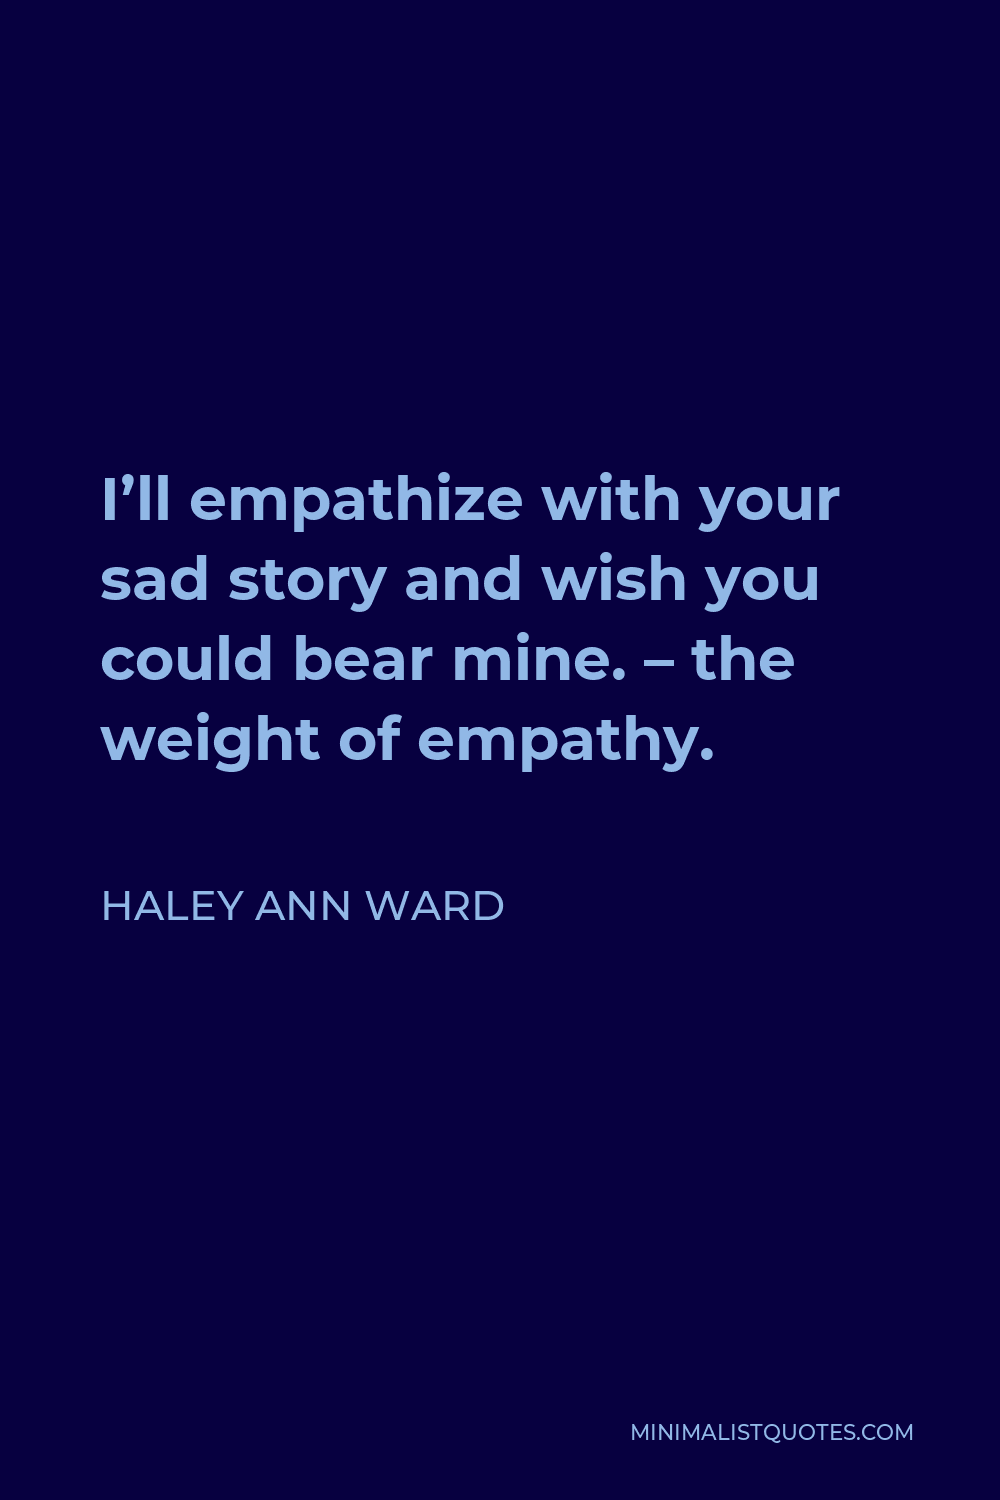 Haley Ann Ward Quote - I’ll empathize with your sad story and wish you could bear mine. – the weight of empathy.